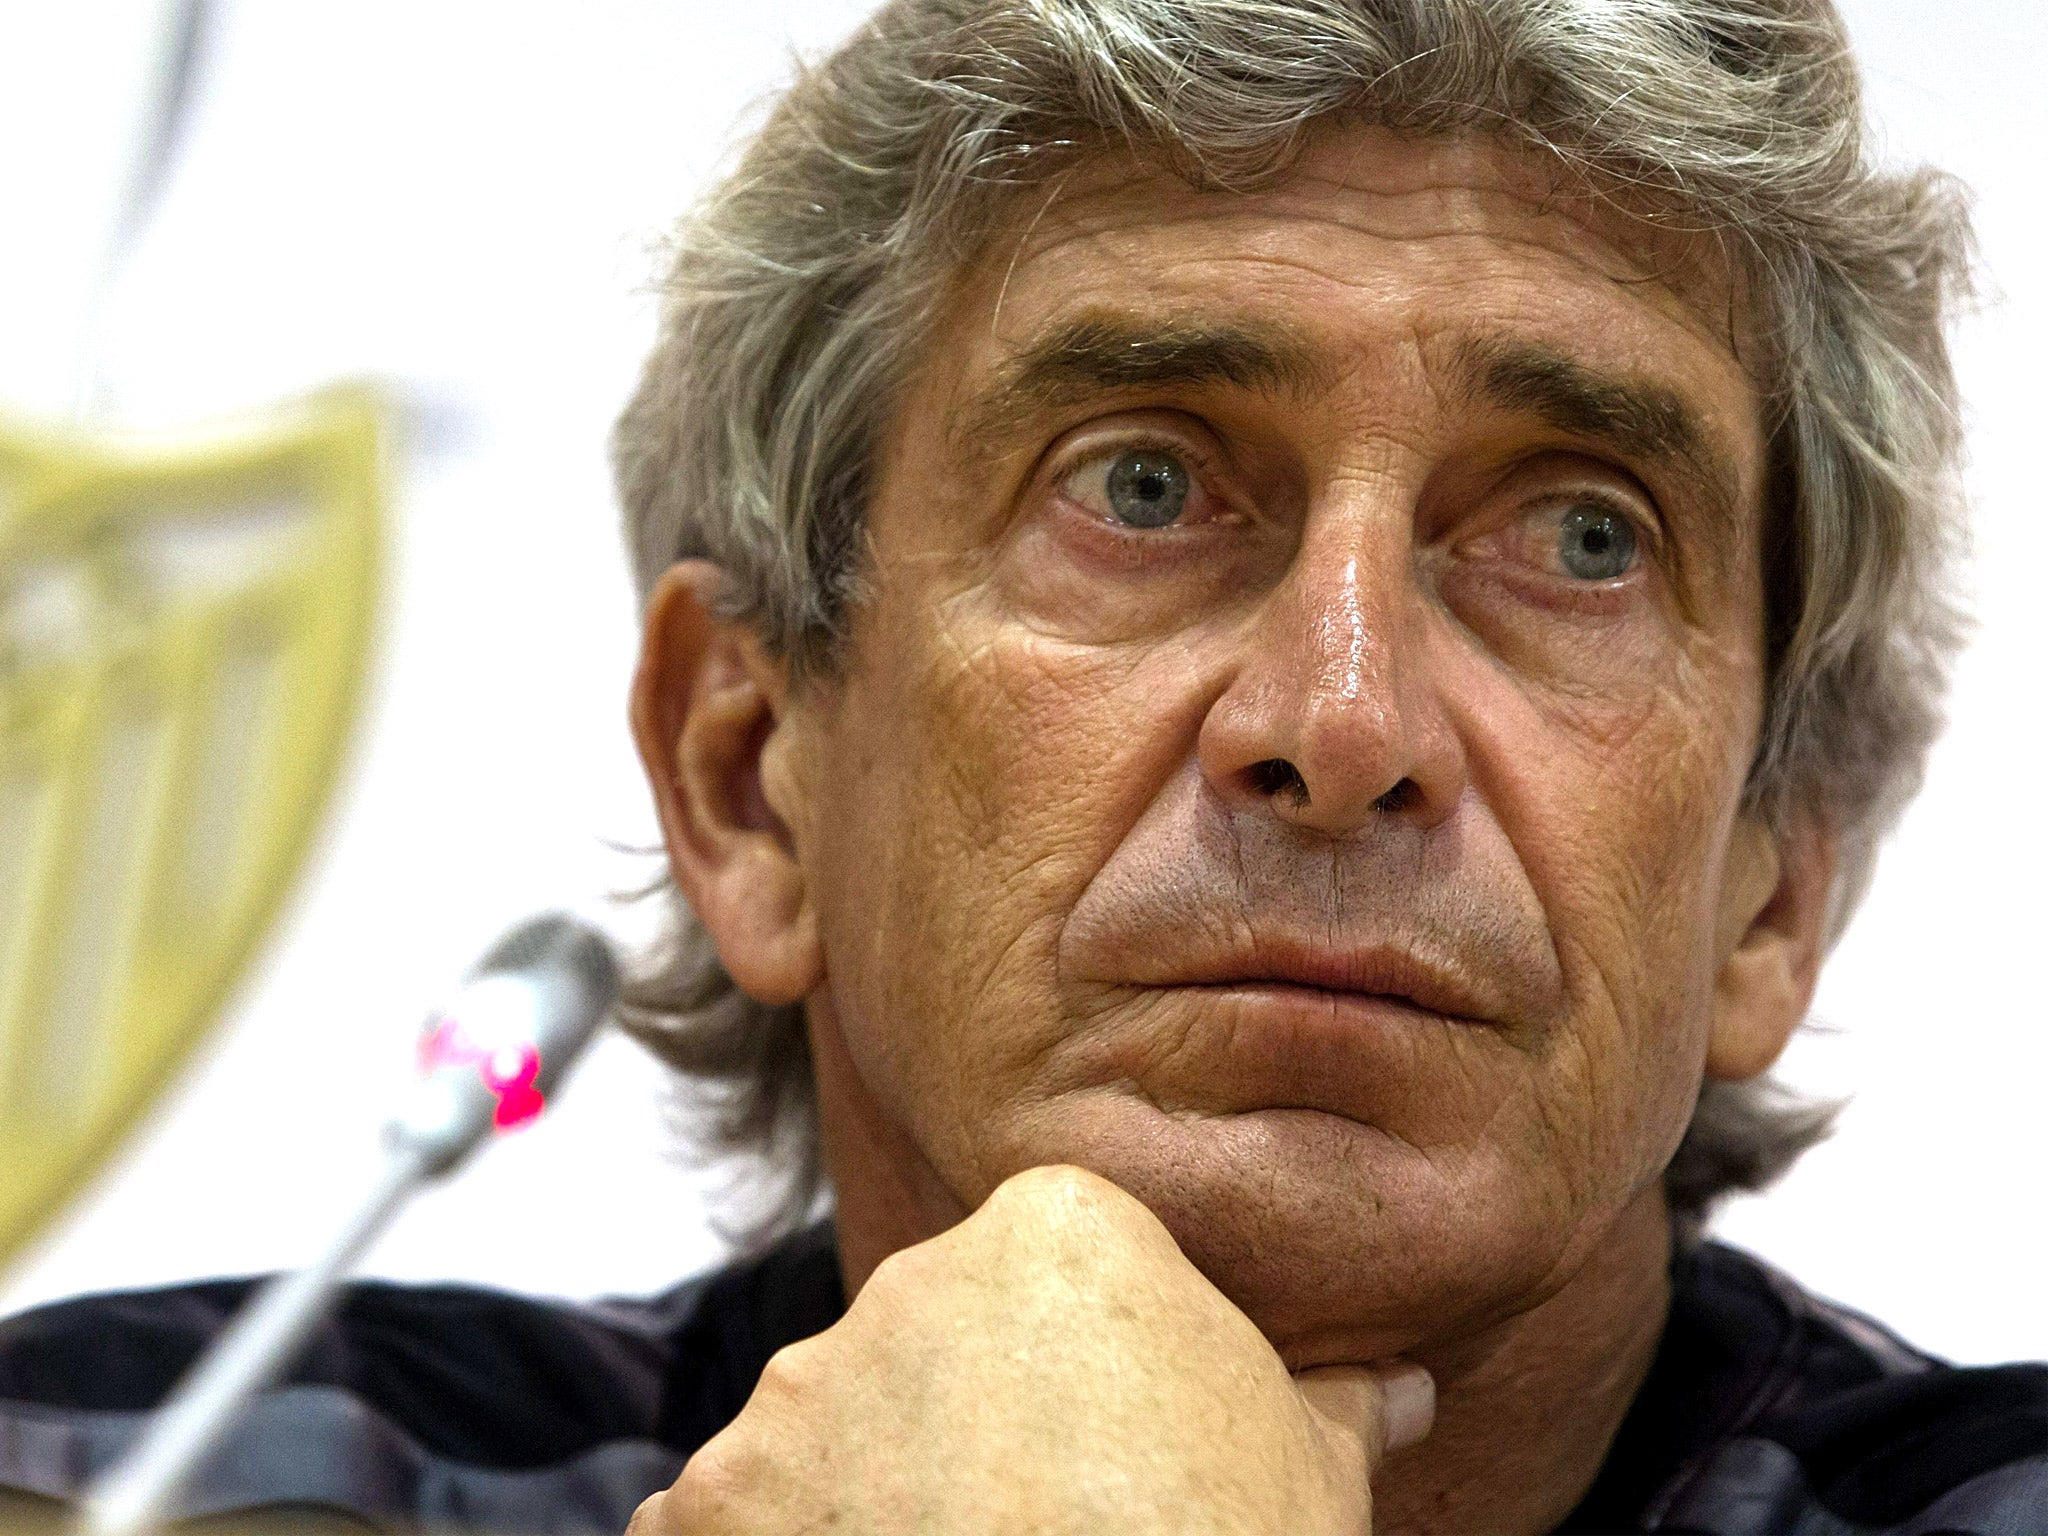 Manuel Pellegrini, pictured, will be happy to face Jose Mourinho if the Portuguese goes back to Chelsea